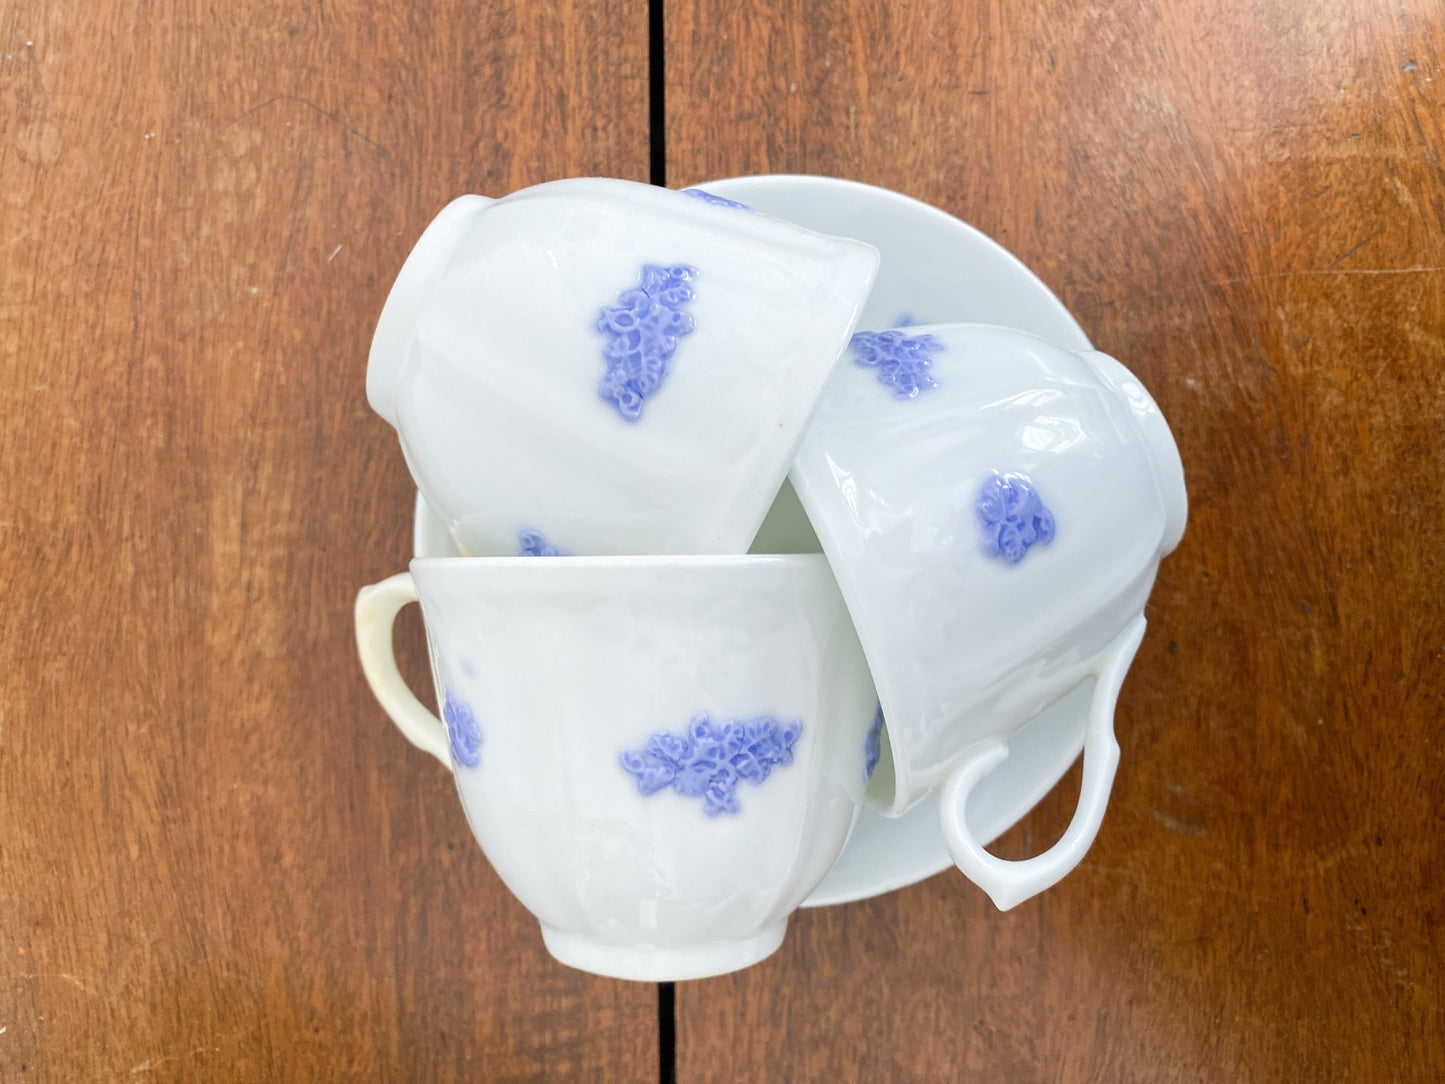 Three small tea cups sit on top of saucers in a pattern. They are facing on their sides with the handles in various directions to show off the violet flowers. The china is a white stark contrast in variation to the wooden tabletop. 